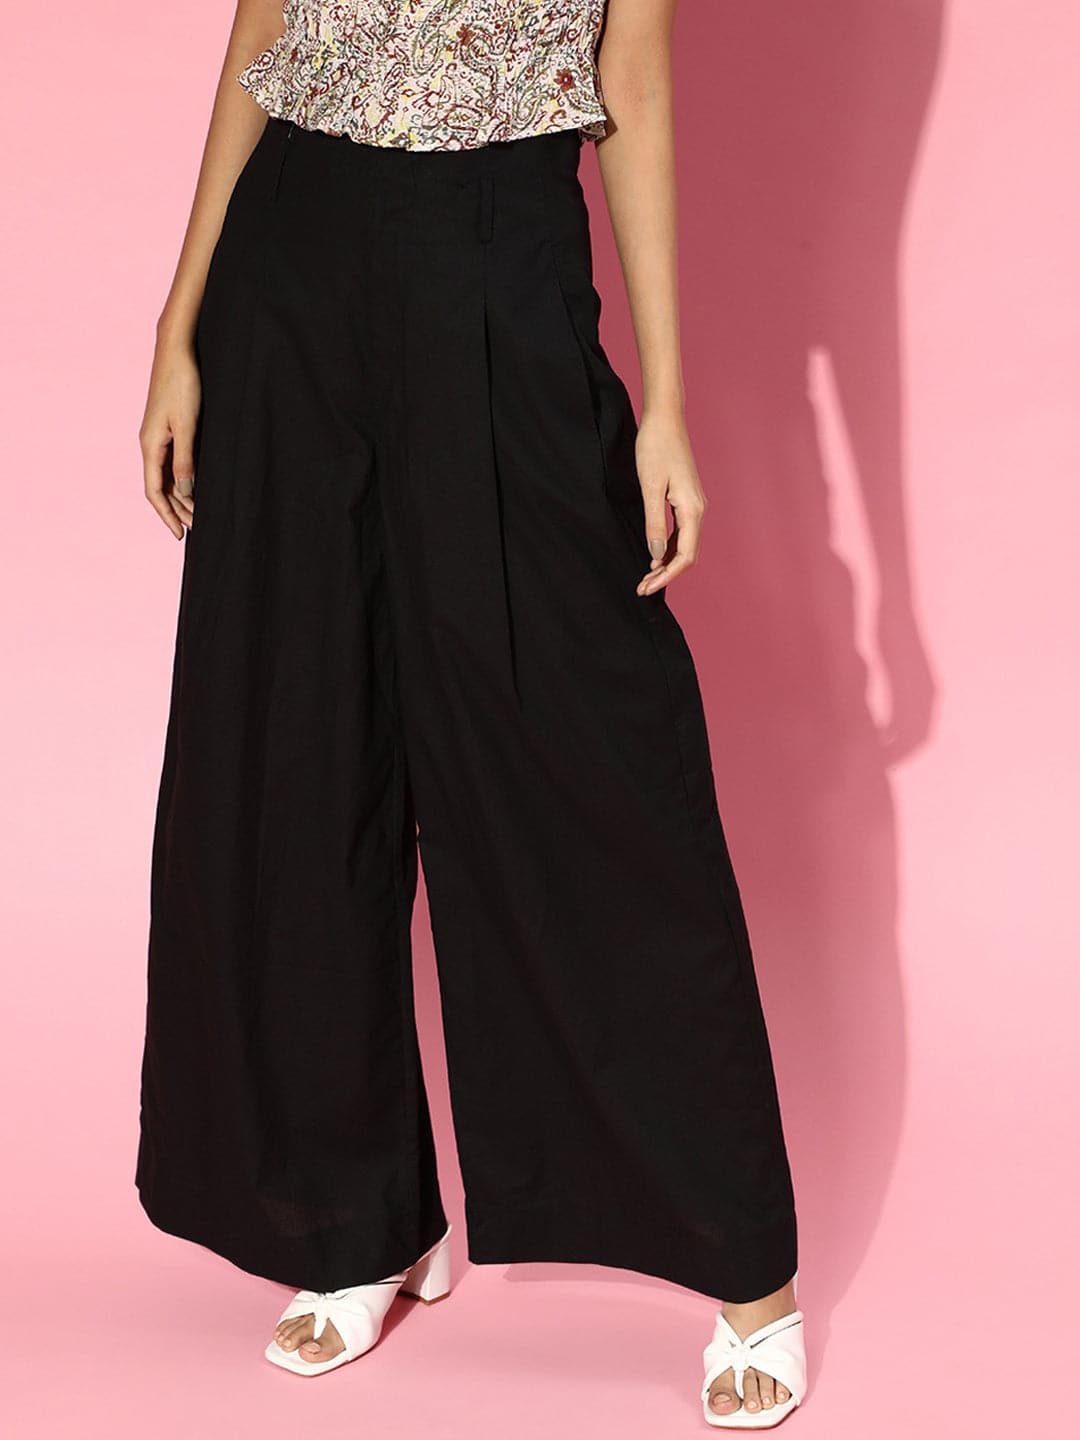 Black Wide Leg Pants With High Front Slits, Black High Waist Palazzo Pants  for Women, Special Event Women's High Rise Pants 